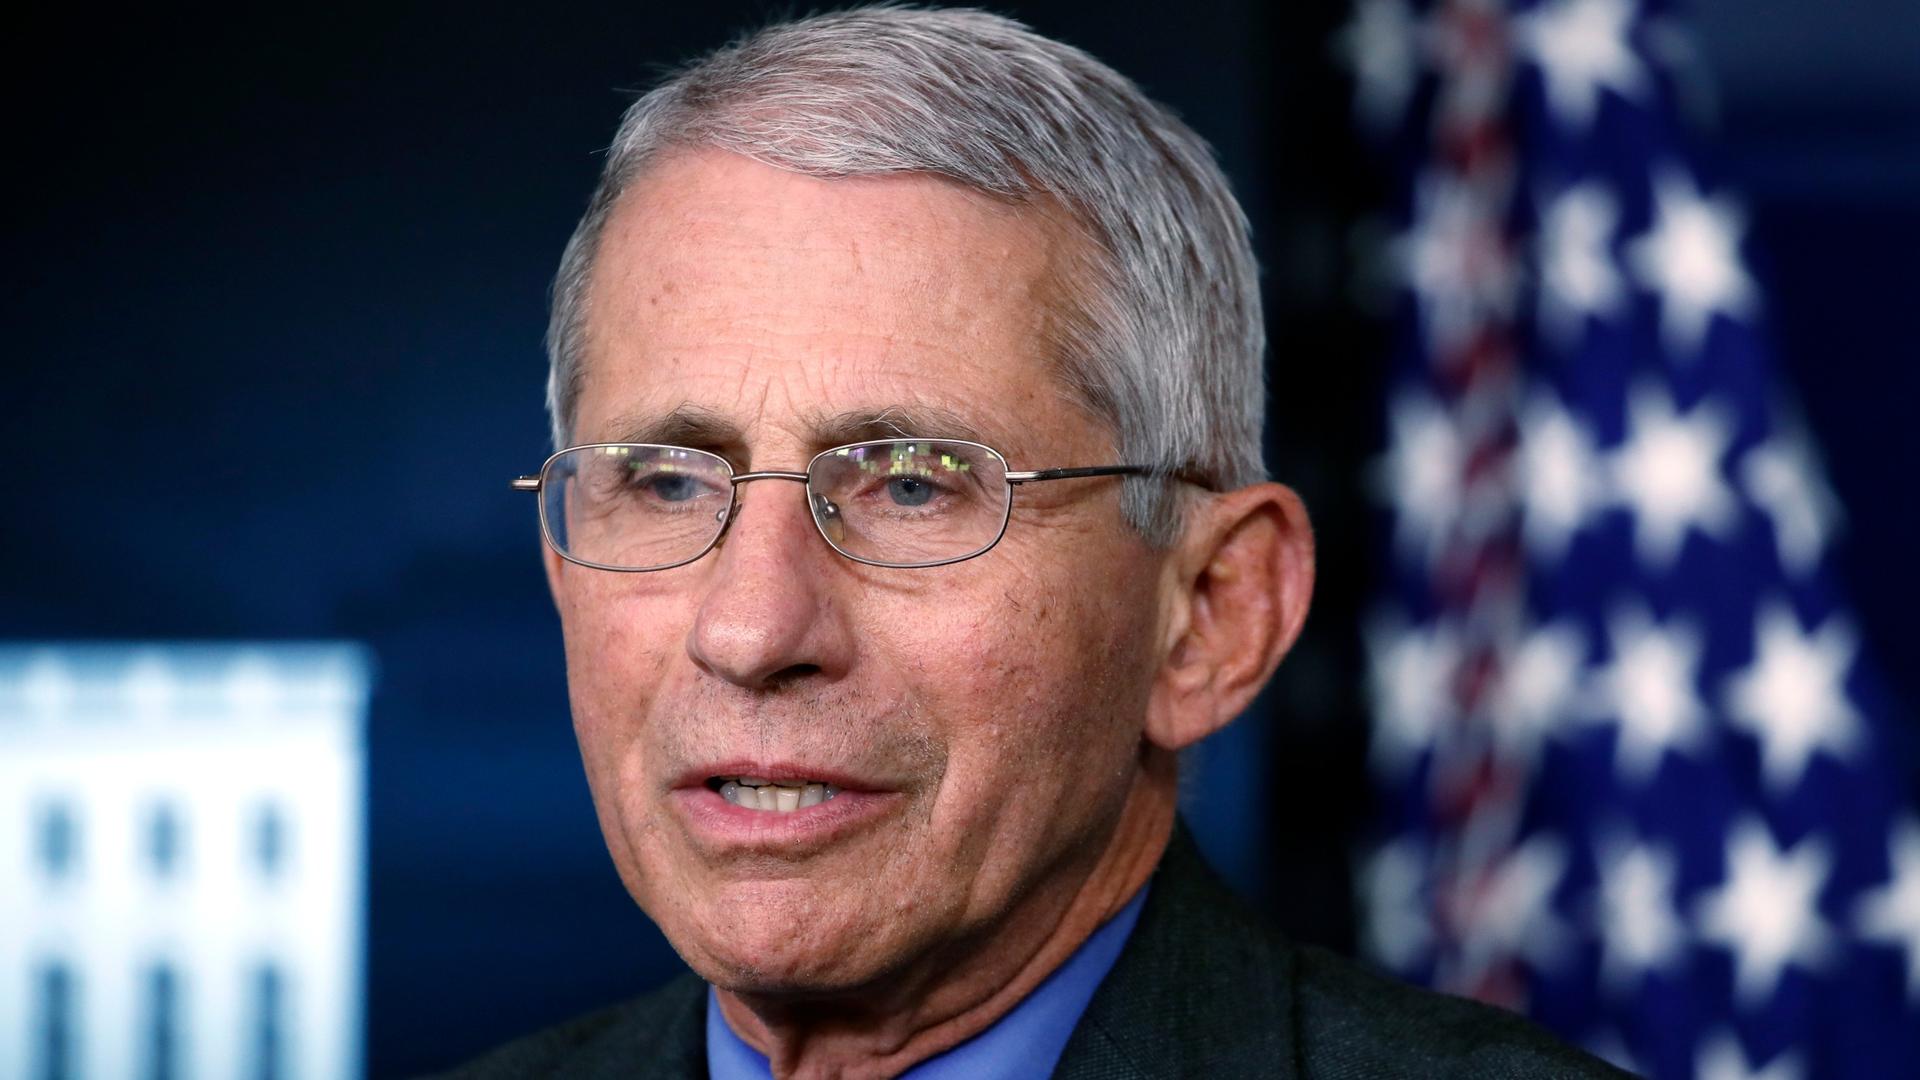 In this file photo, Dr. Anthony Fauci, director of the National Institute of Allergy and Infectious Diseases, speaks about the coronavirus in the press briefing room at the White House in Washington, April 13, 2020.